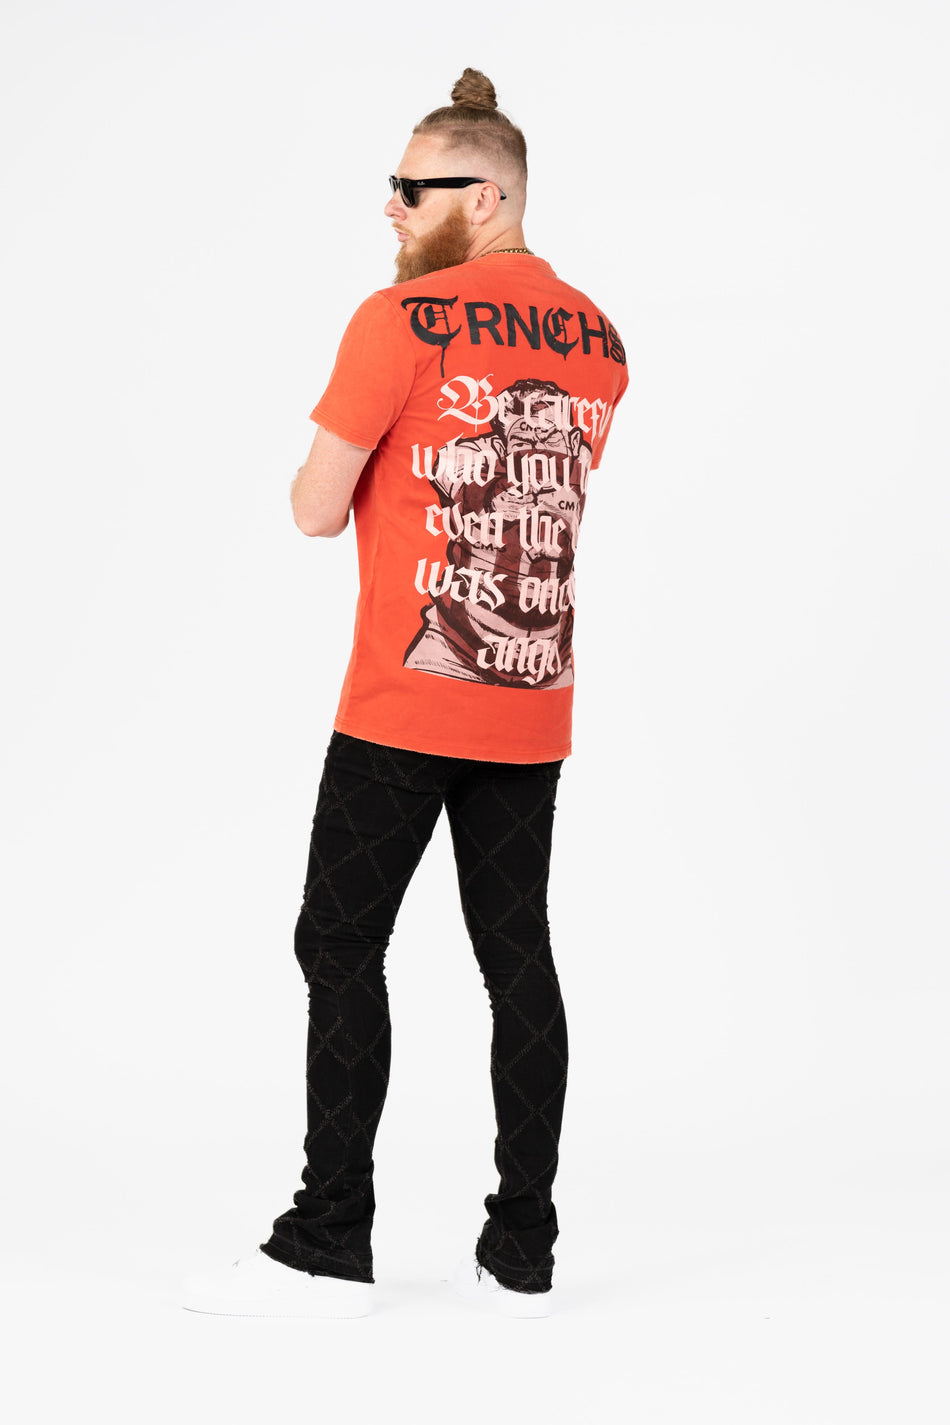 TRNCHS TARGET & SWITCHES TEE